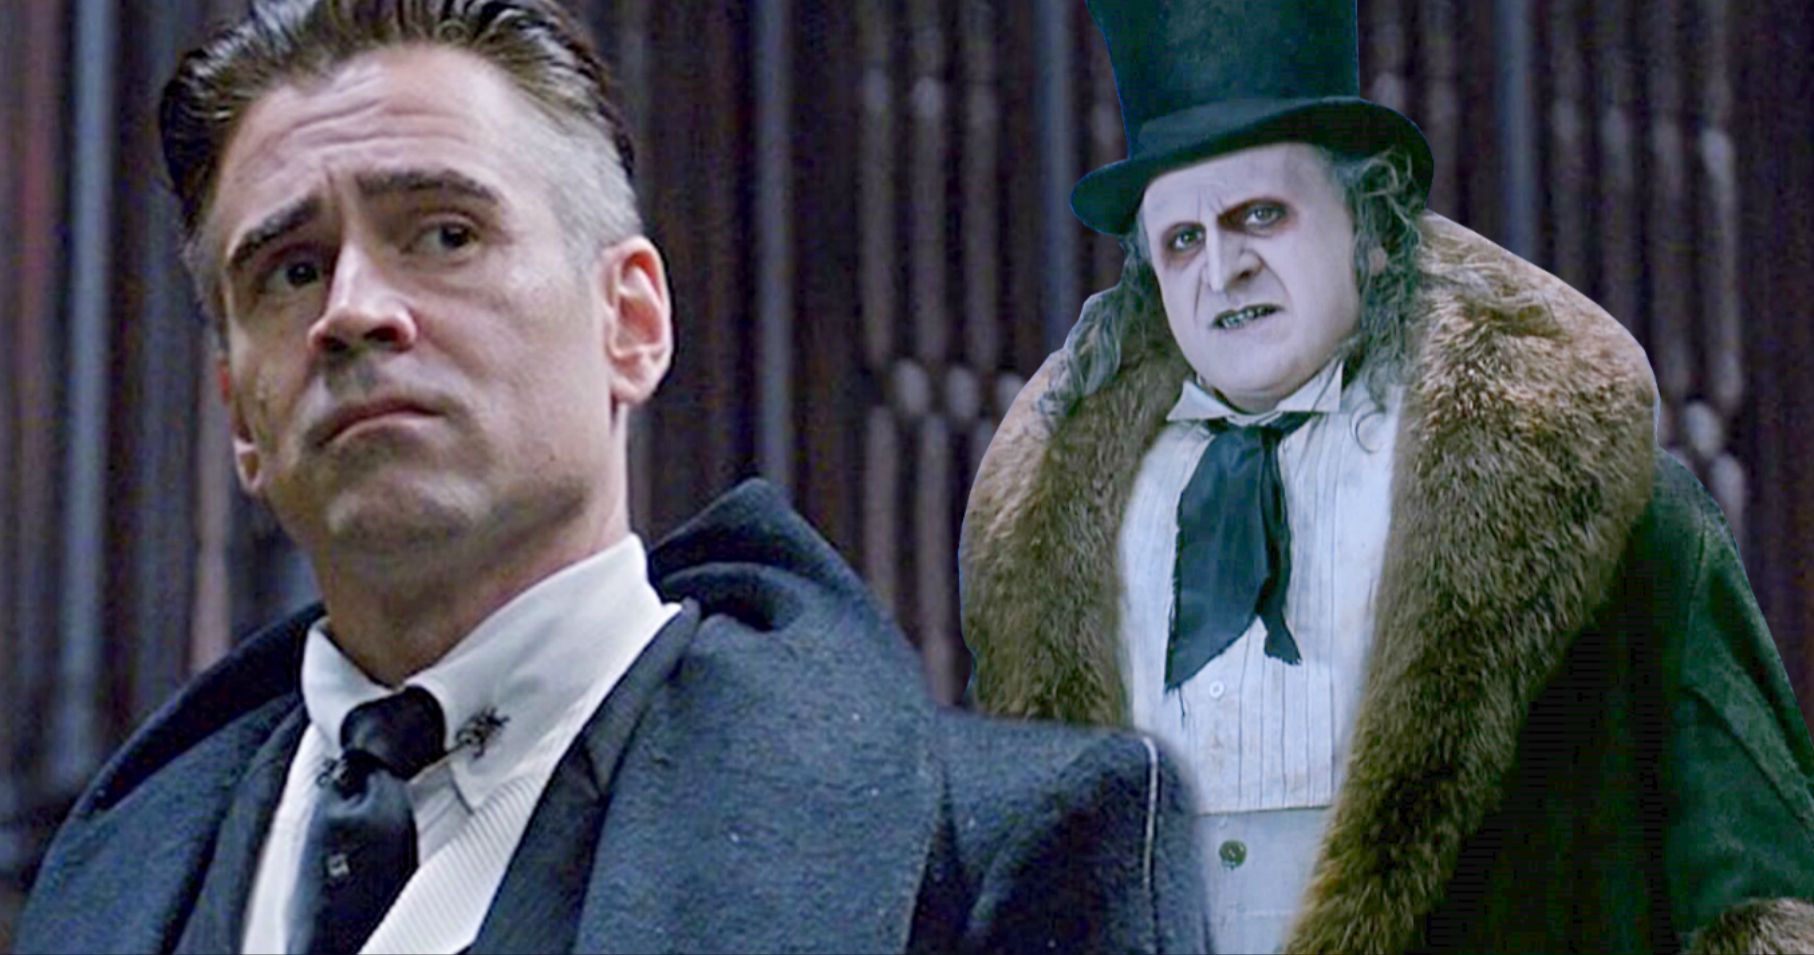 Latest The Batman Set Images Have a Better Look at Colin Farrell's Penguin Transformation